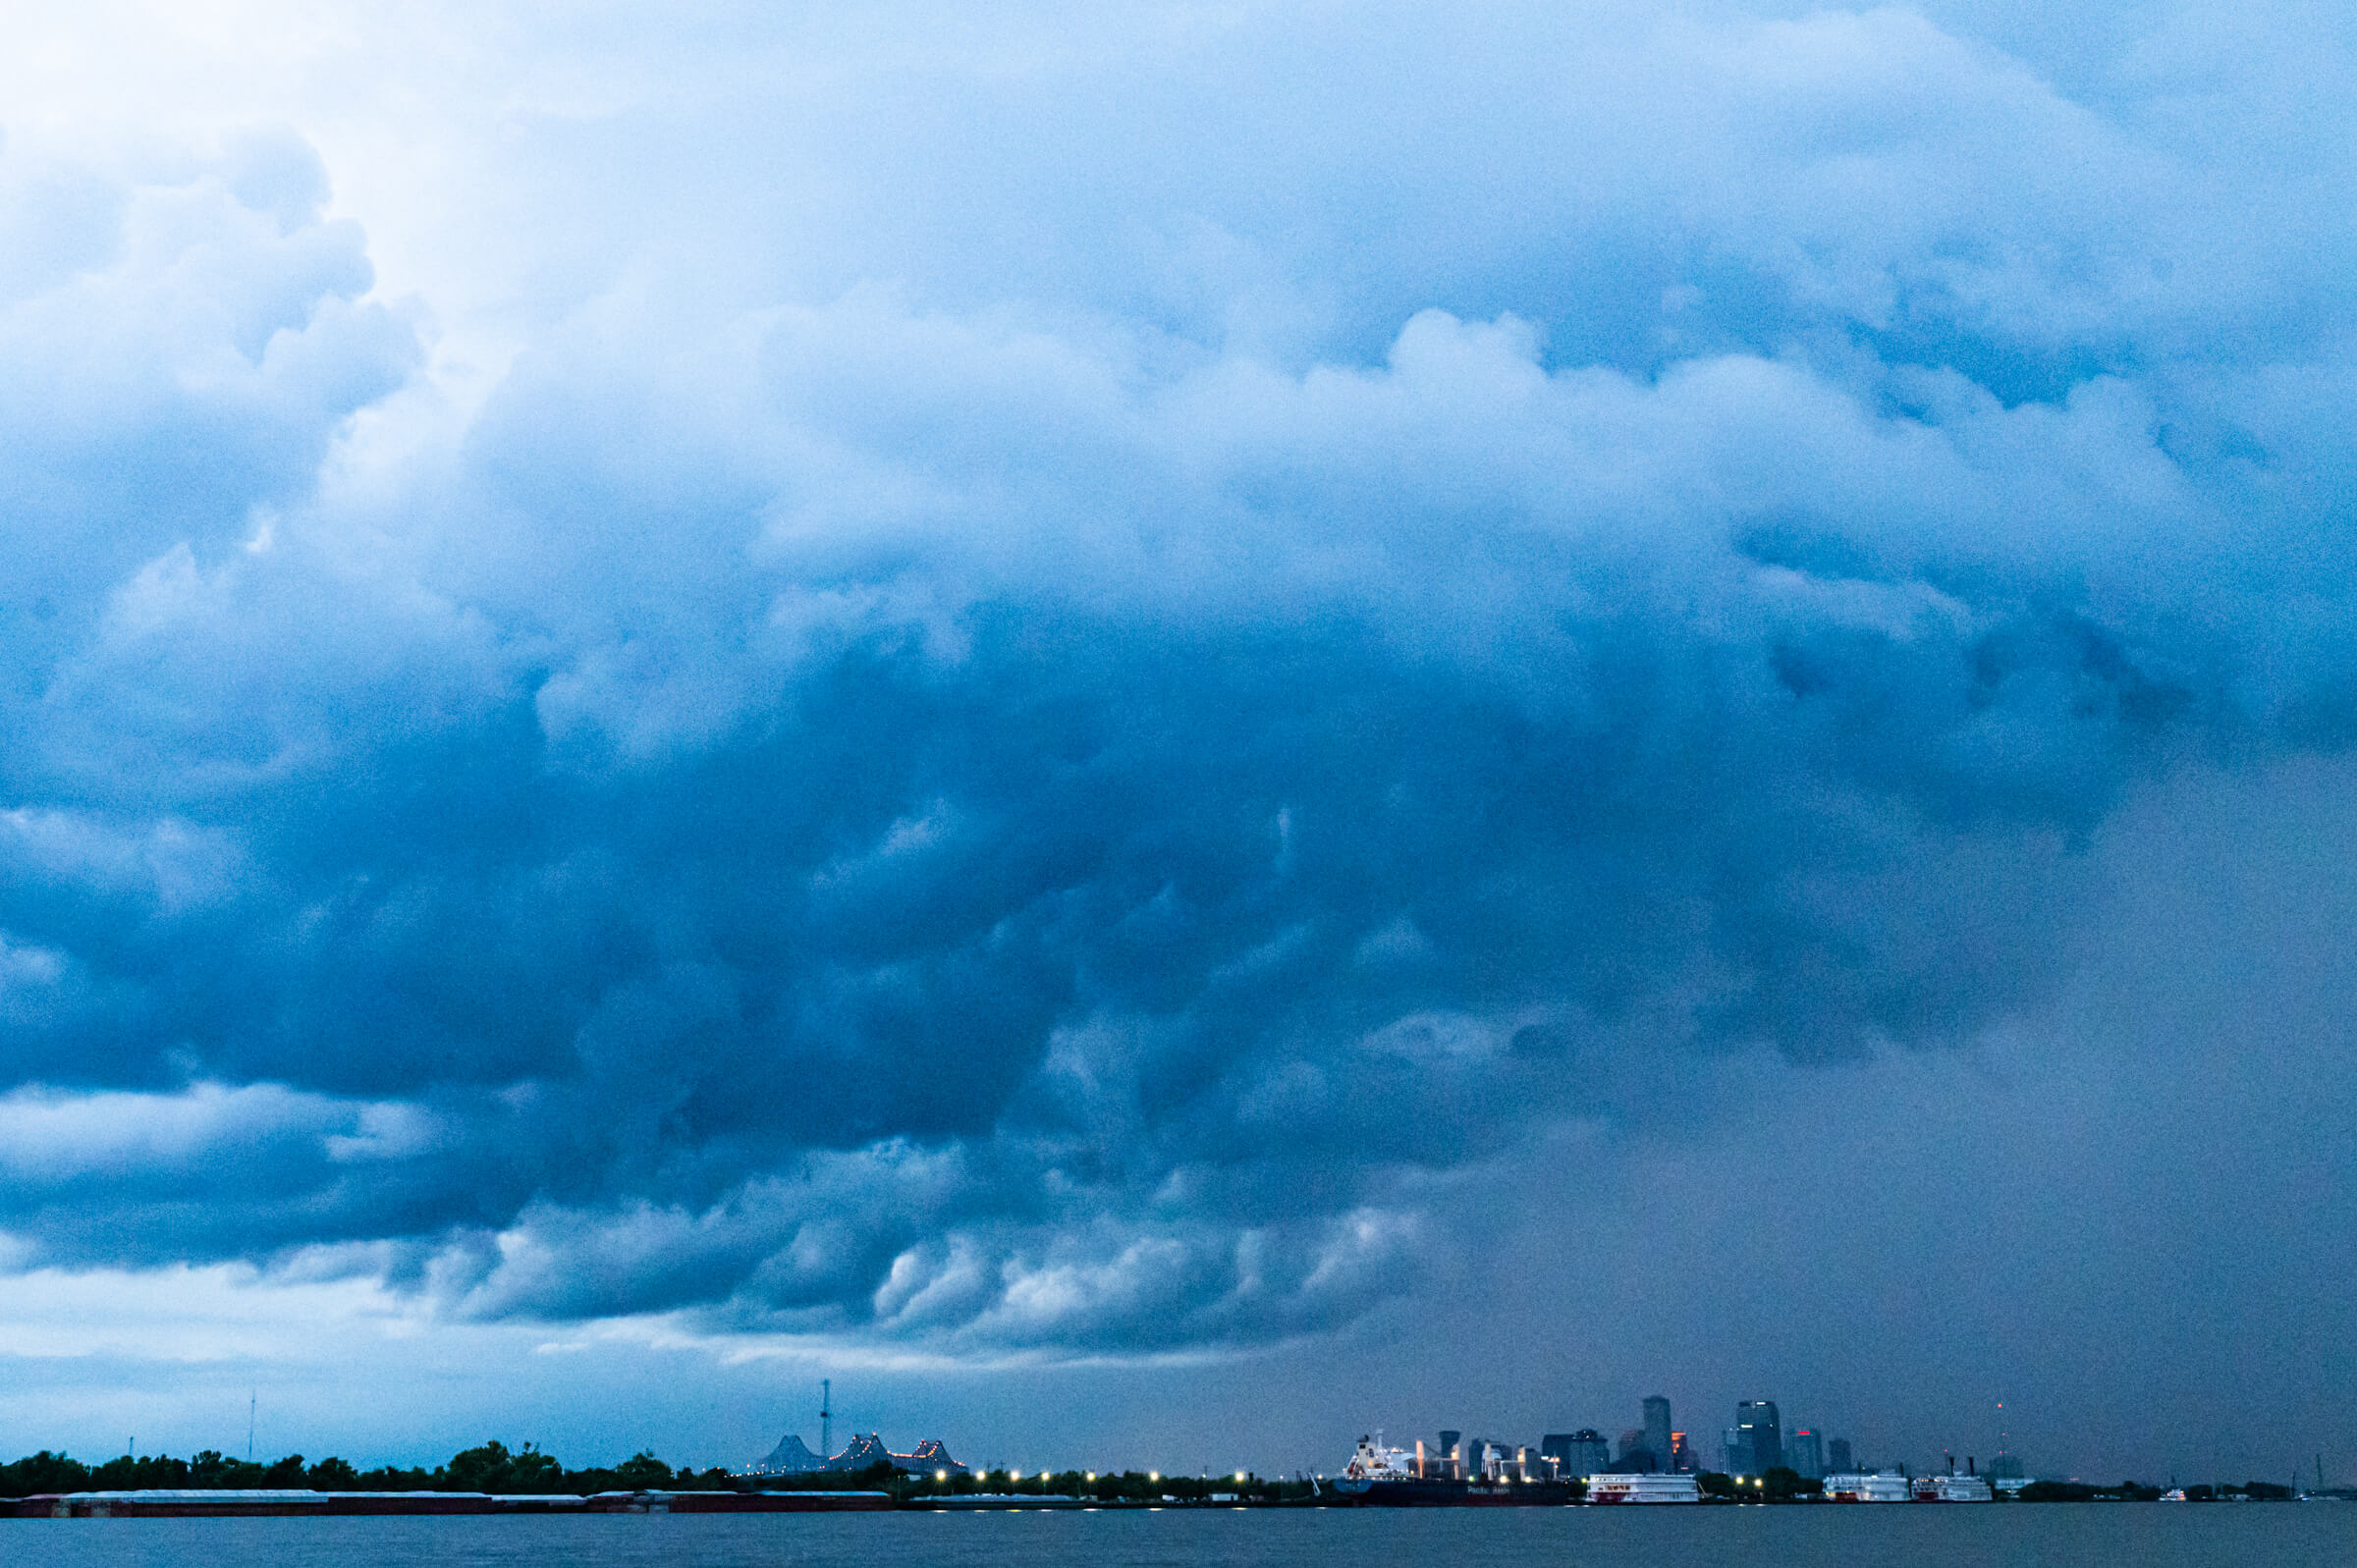 A storm passes over New Orleans, photographed from the river in Arabi